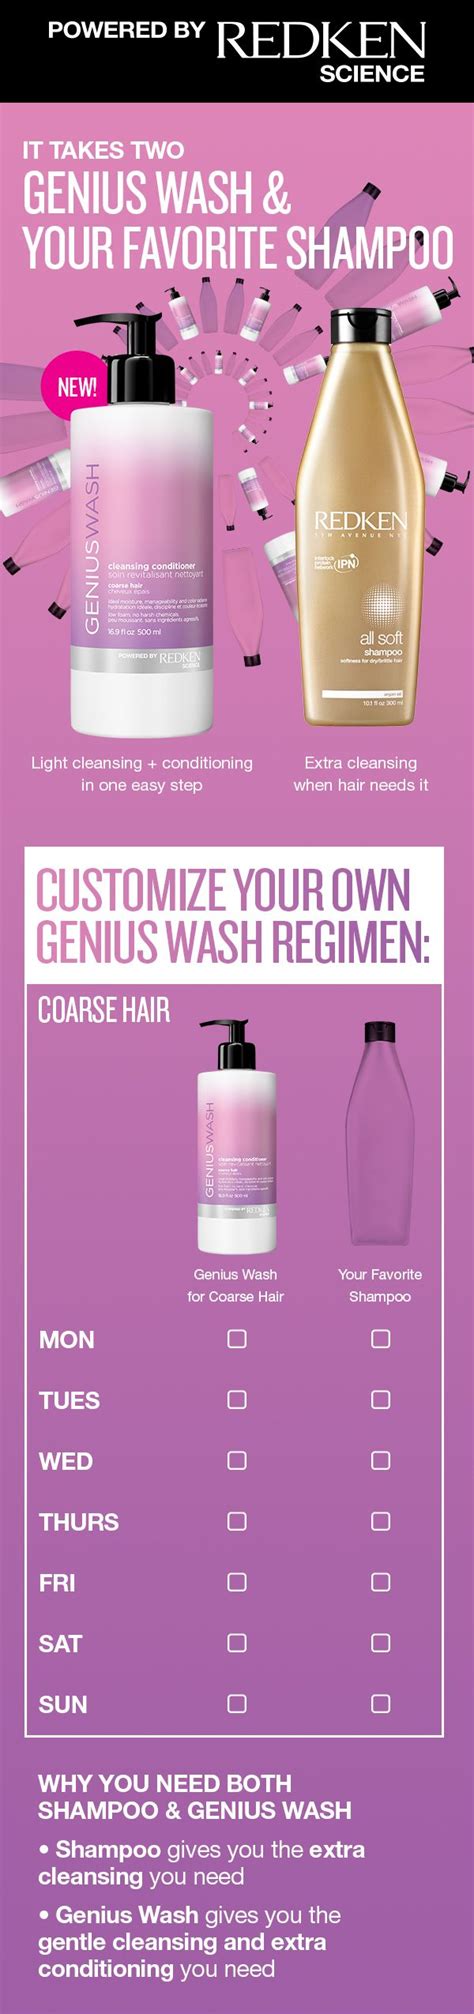 Its Time To Rotate Your Regimen Redkens Genius Wash Cleansing Conditioner Co Washes Are Great